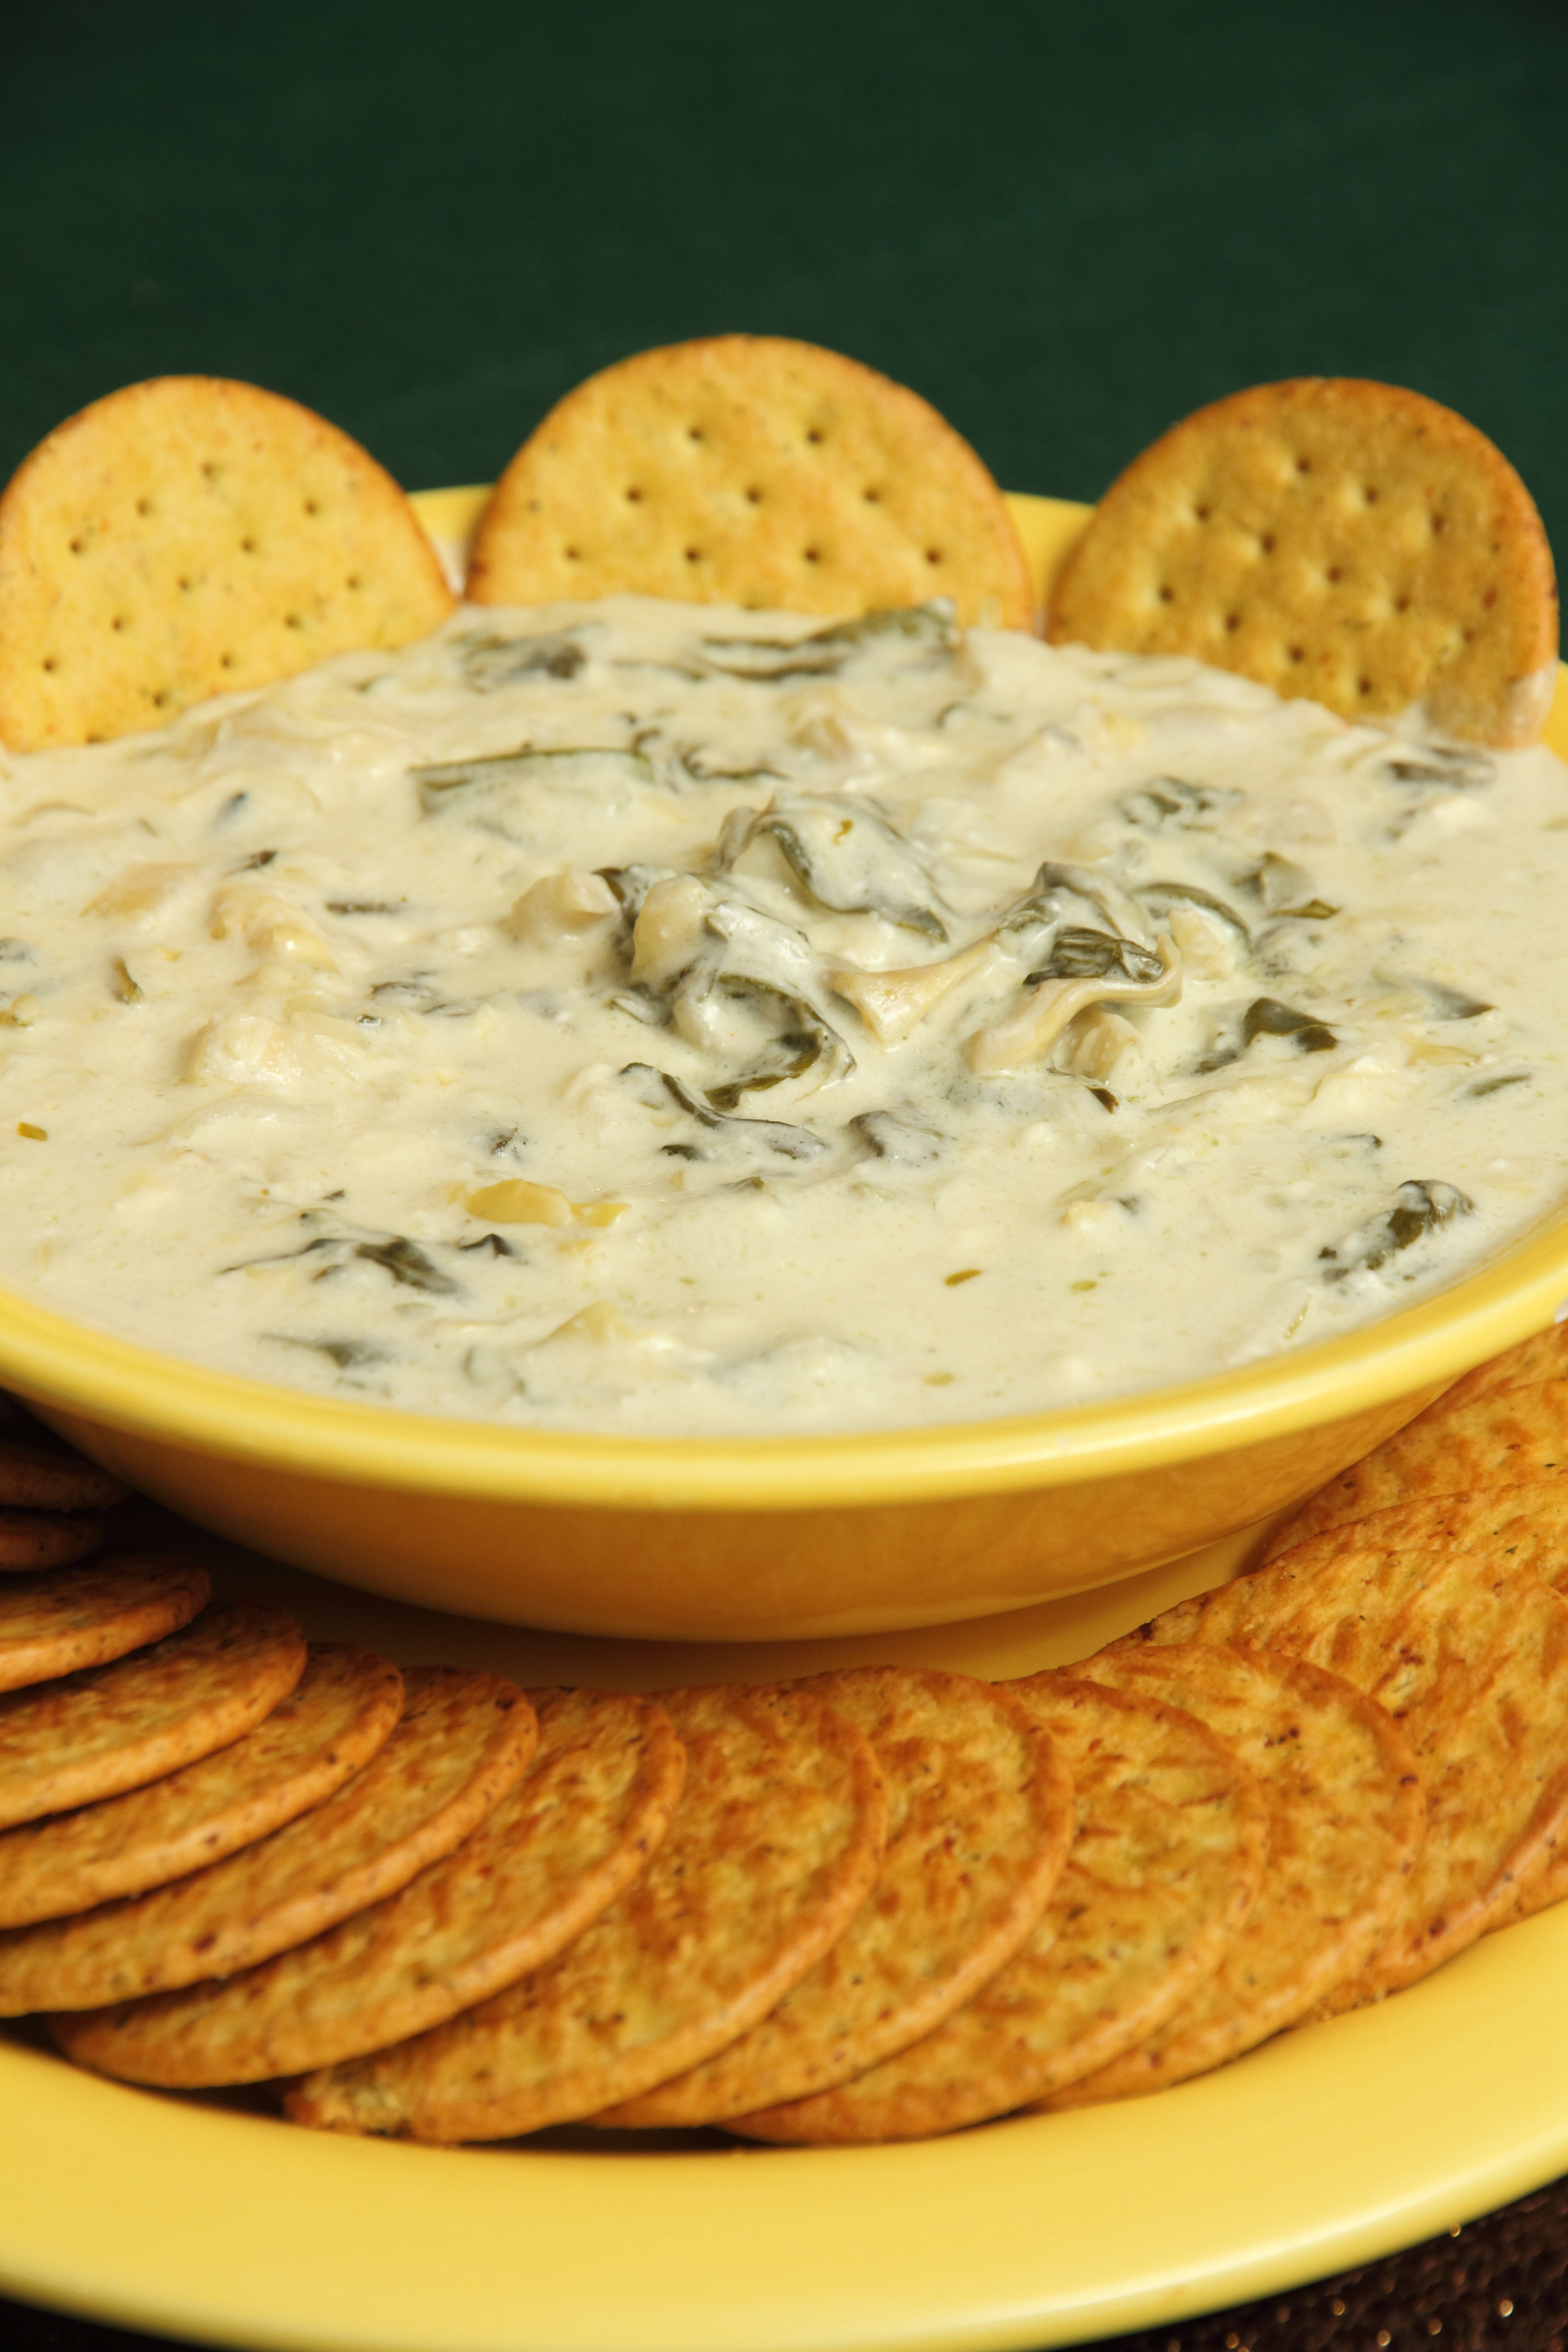 A bowl of dip with crackers on the side.